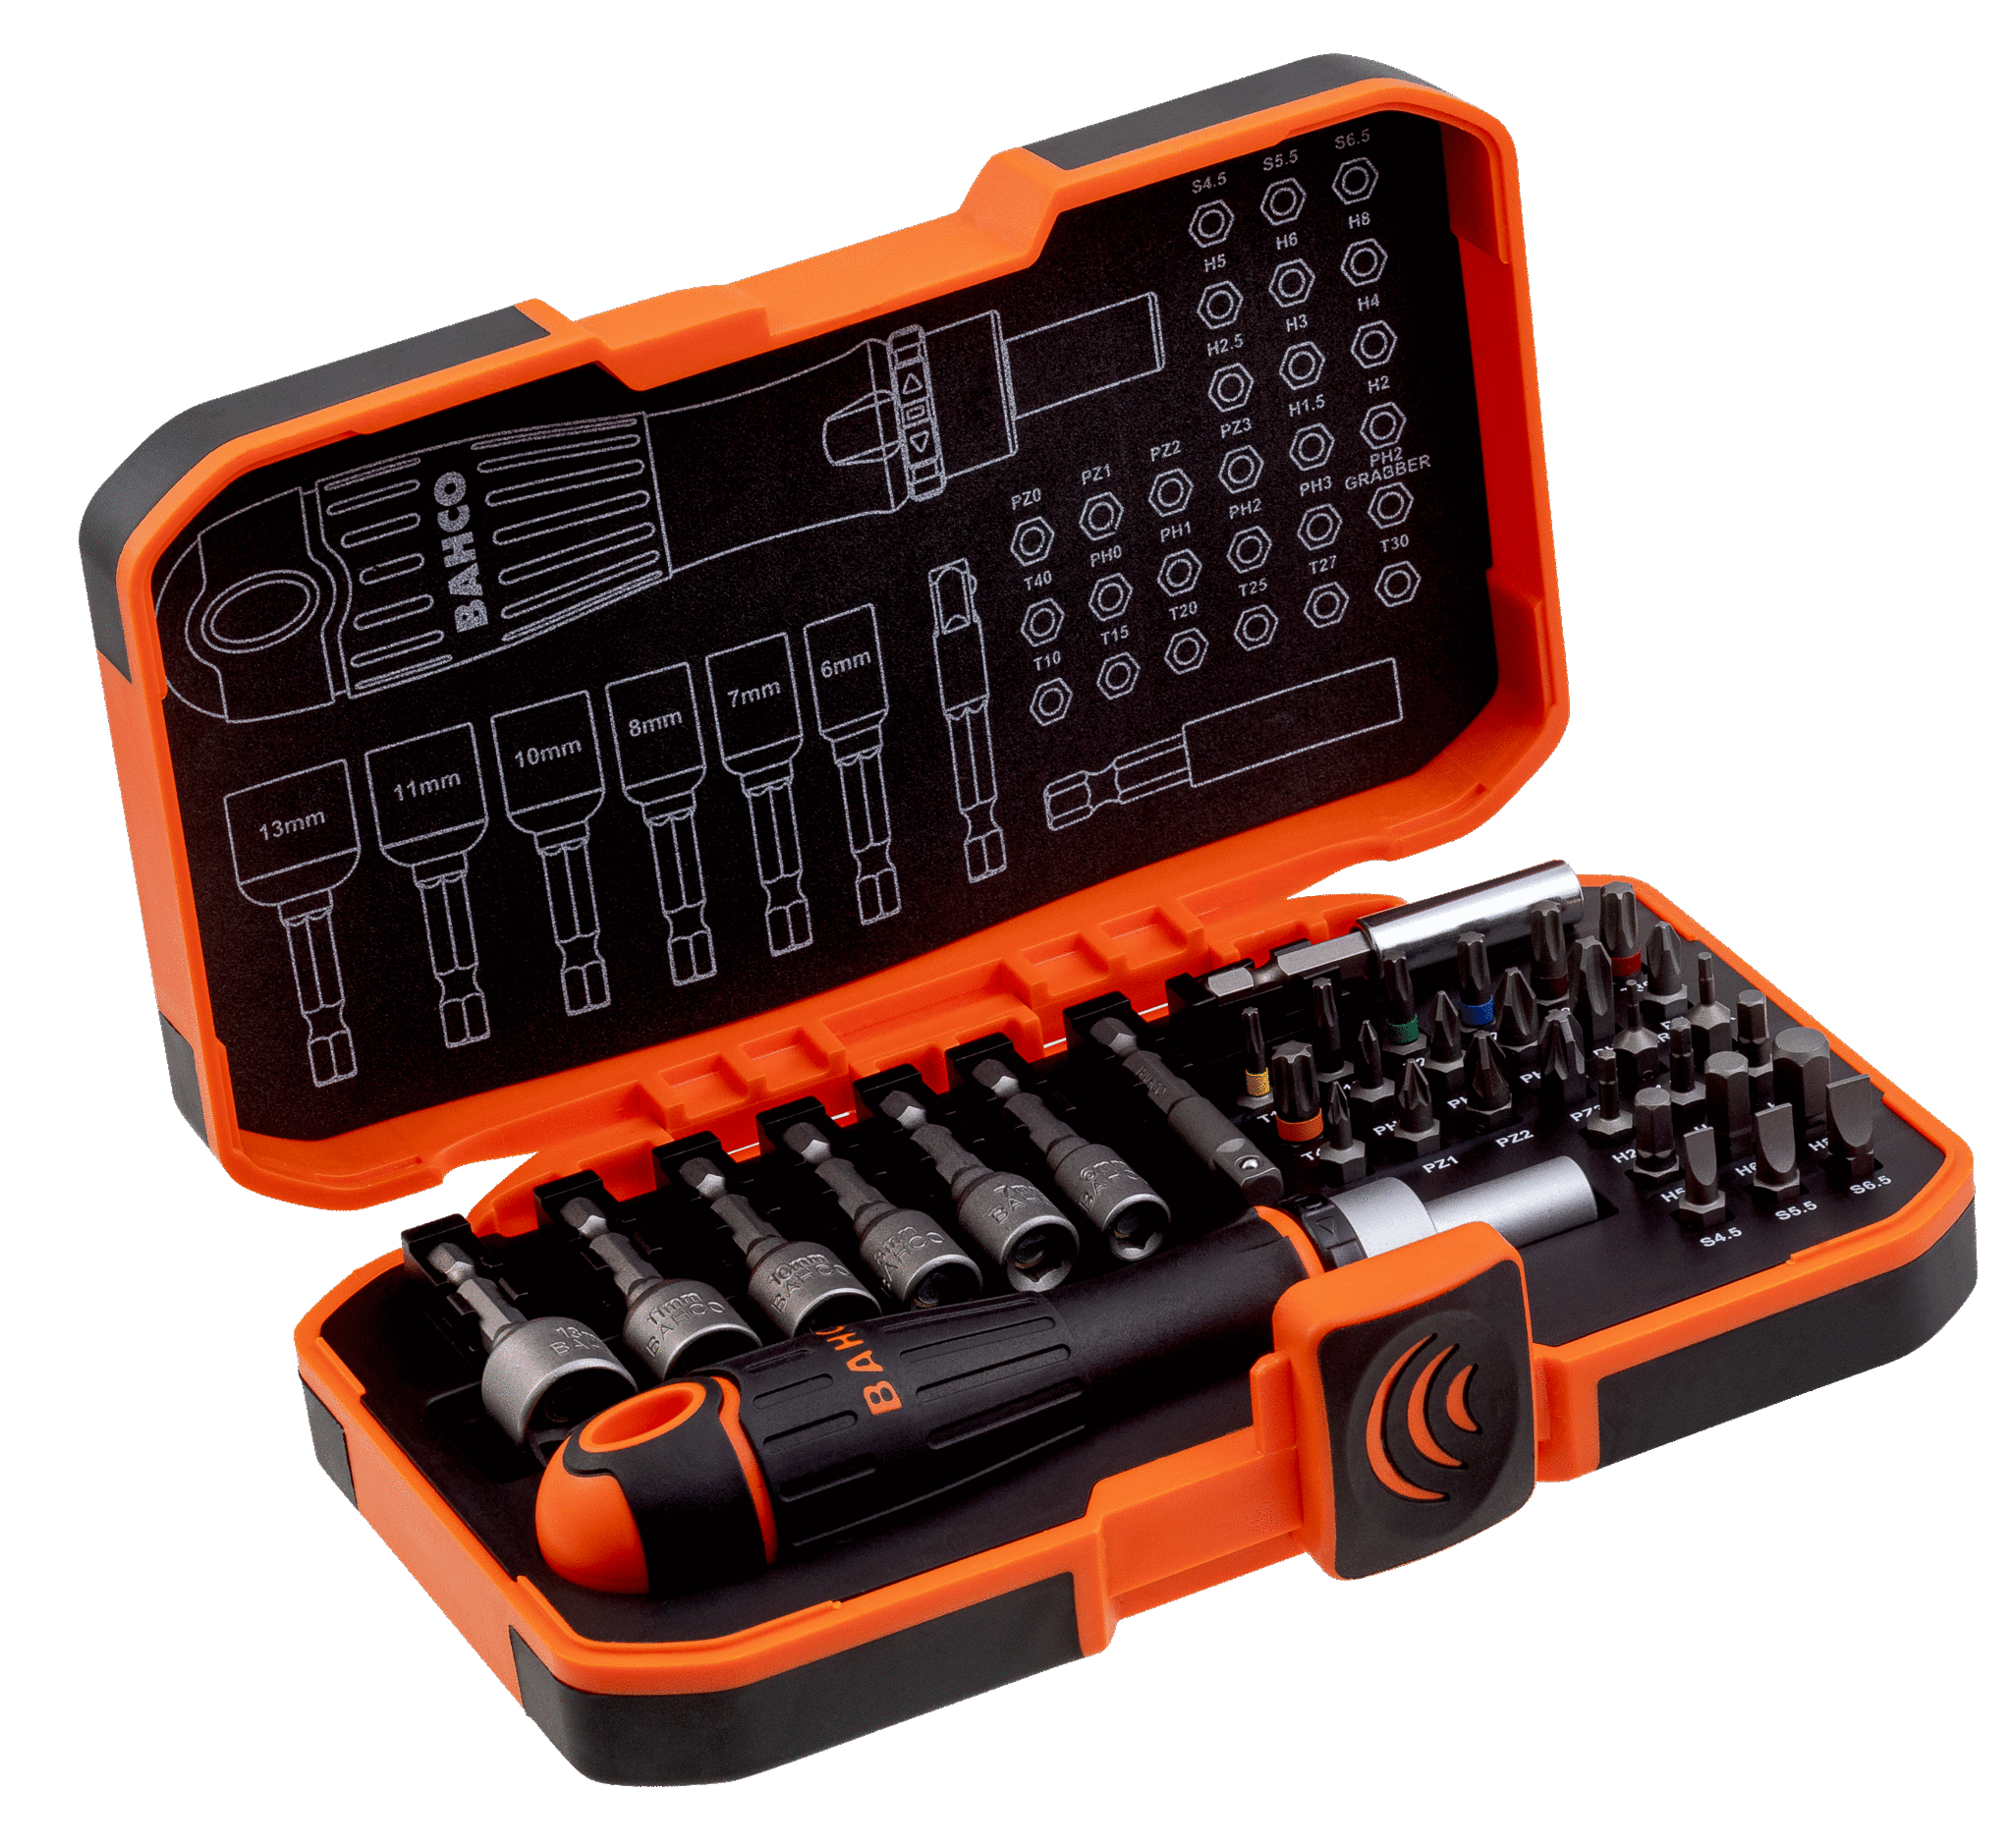 Sockets and Extension Bars-Professional Repair Tool Kit for iPhone Glasses Electronics Huepar 65 in 1 Precision Screwdriver Ratchet Set Includes Slotted/Phillips/Torx and More Bits Computer Watch